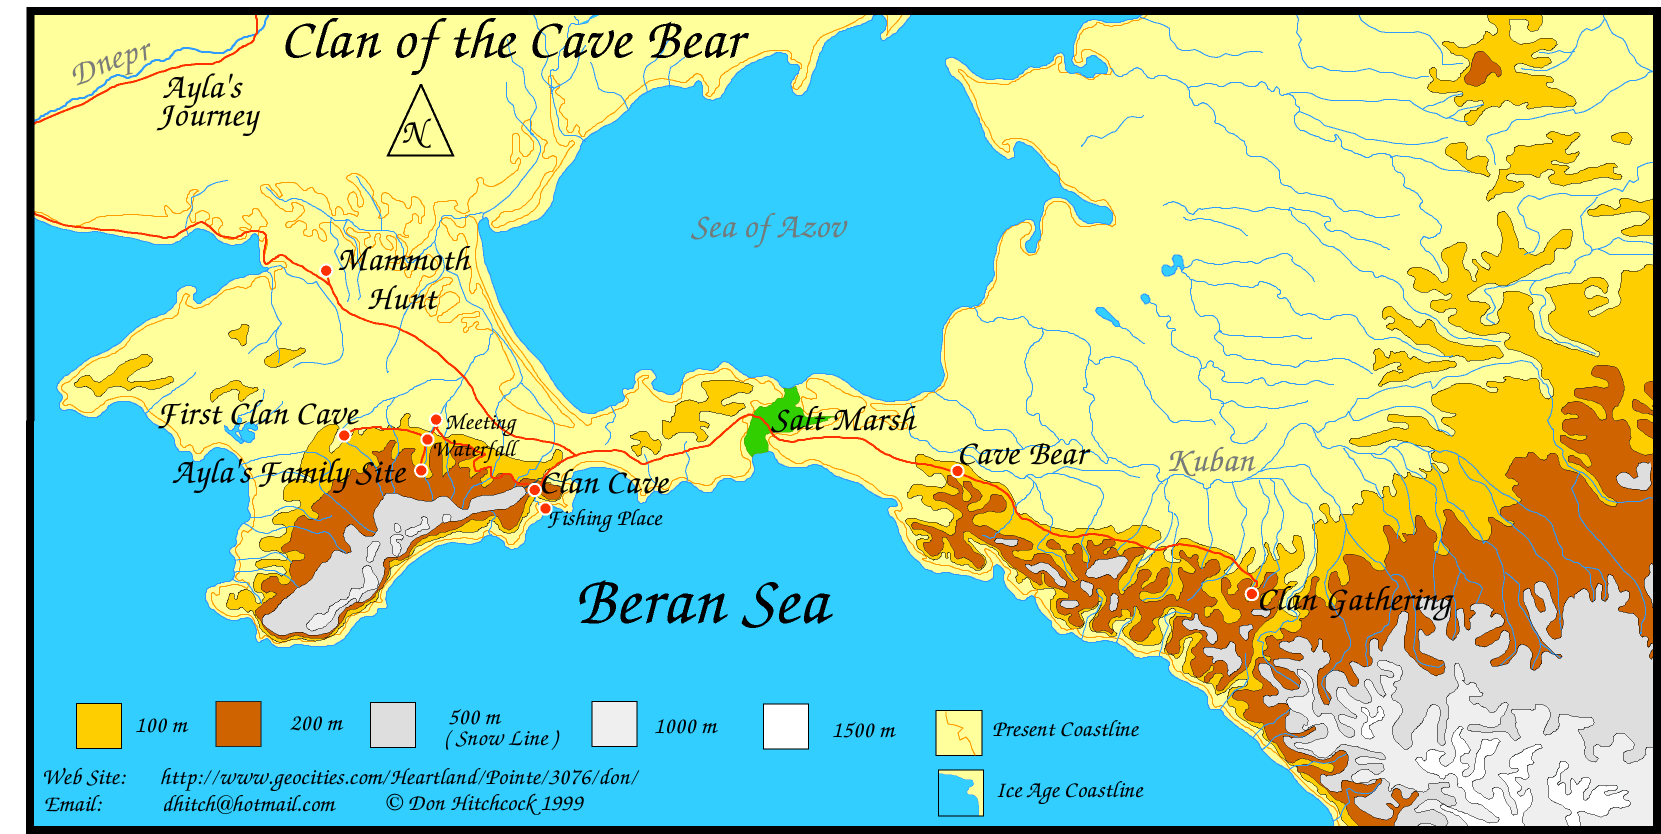 Map of Clan of the Cave Bear